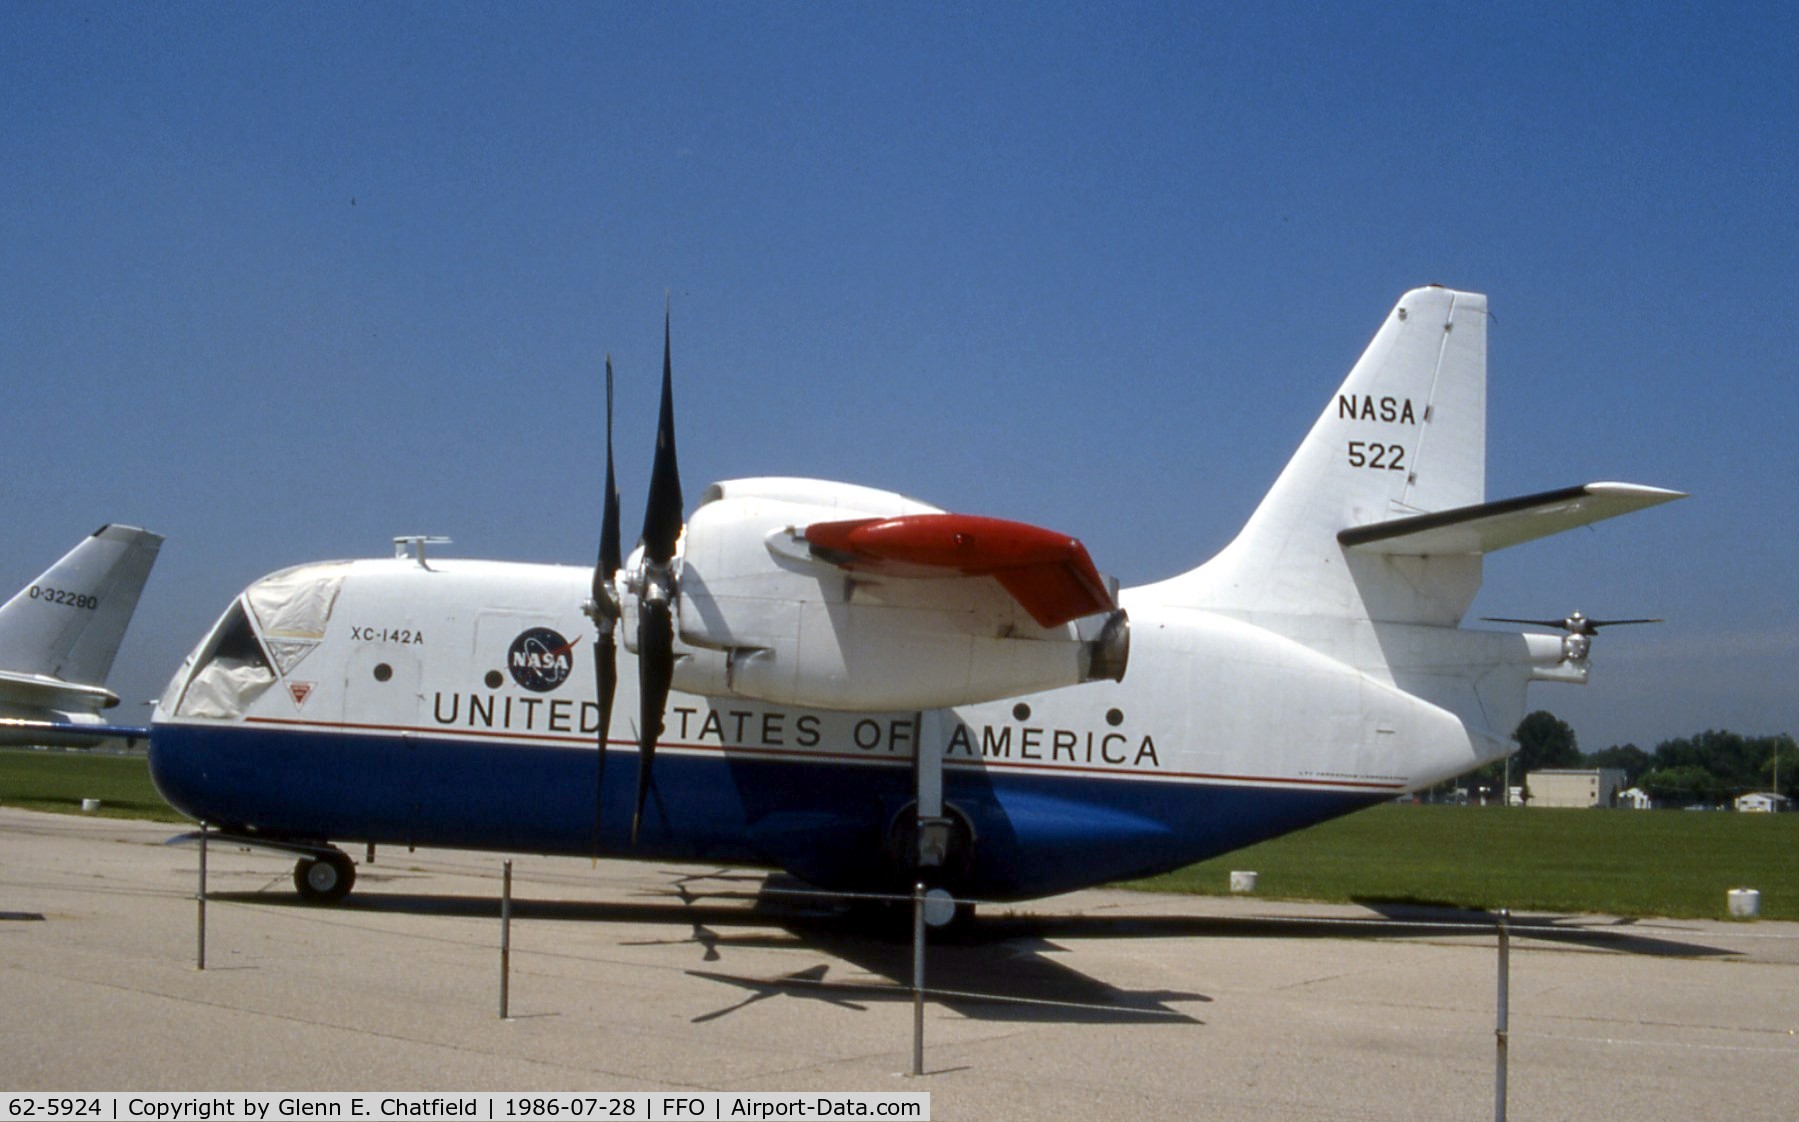 62-5924, 1964 LTV/Hiller/Ryan XC-142A C/N 4, XC-142 tilt-wing transport at the National Museum of the U.S. Air Force